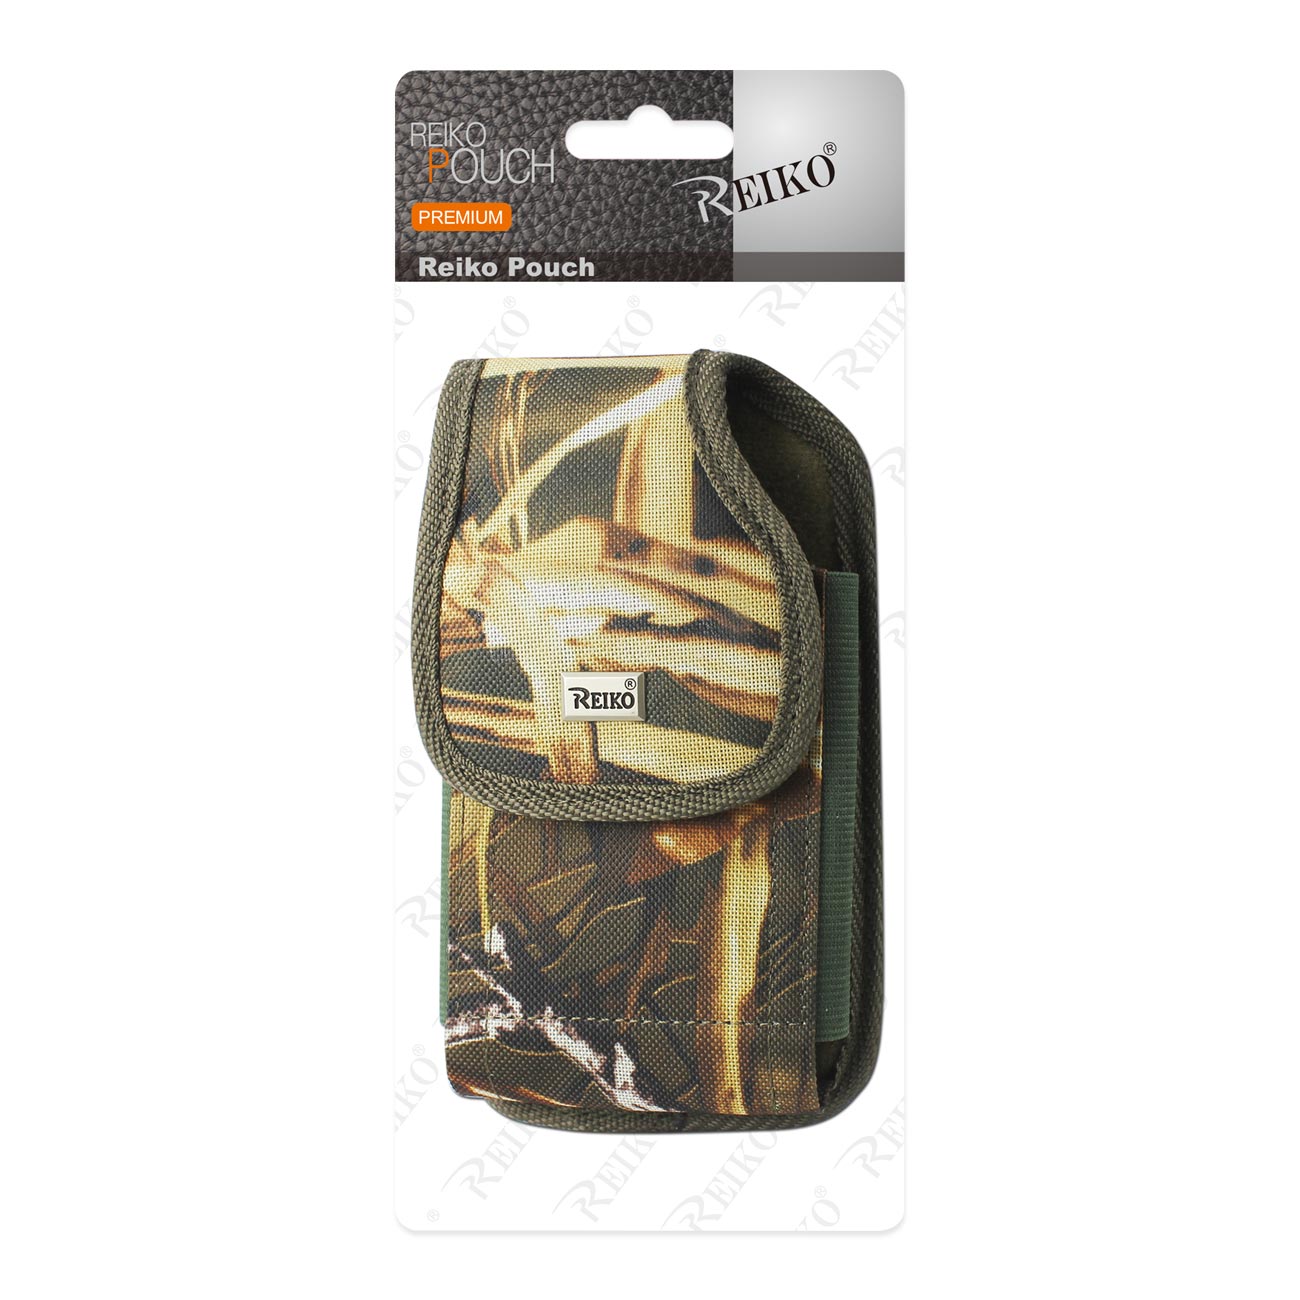 Vertical Rugged Pouch/Phone Holster With Velcro Closure Camouflage In Cardboard Packaging